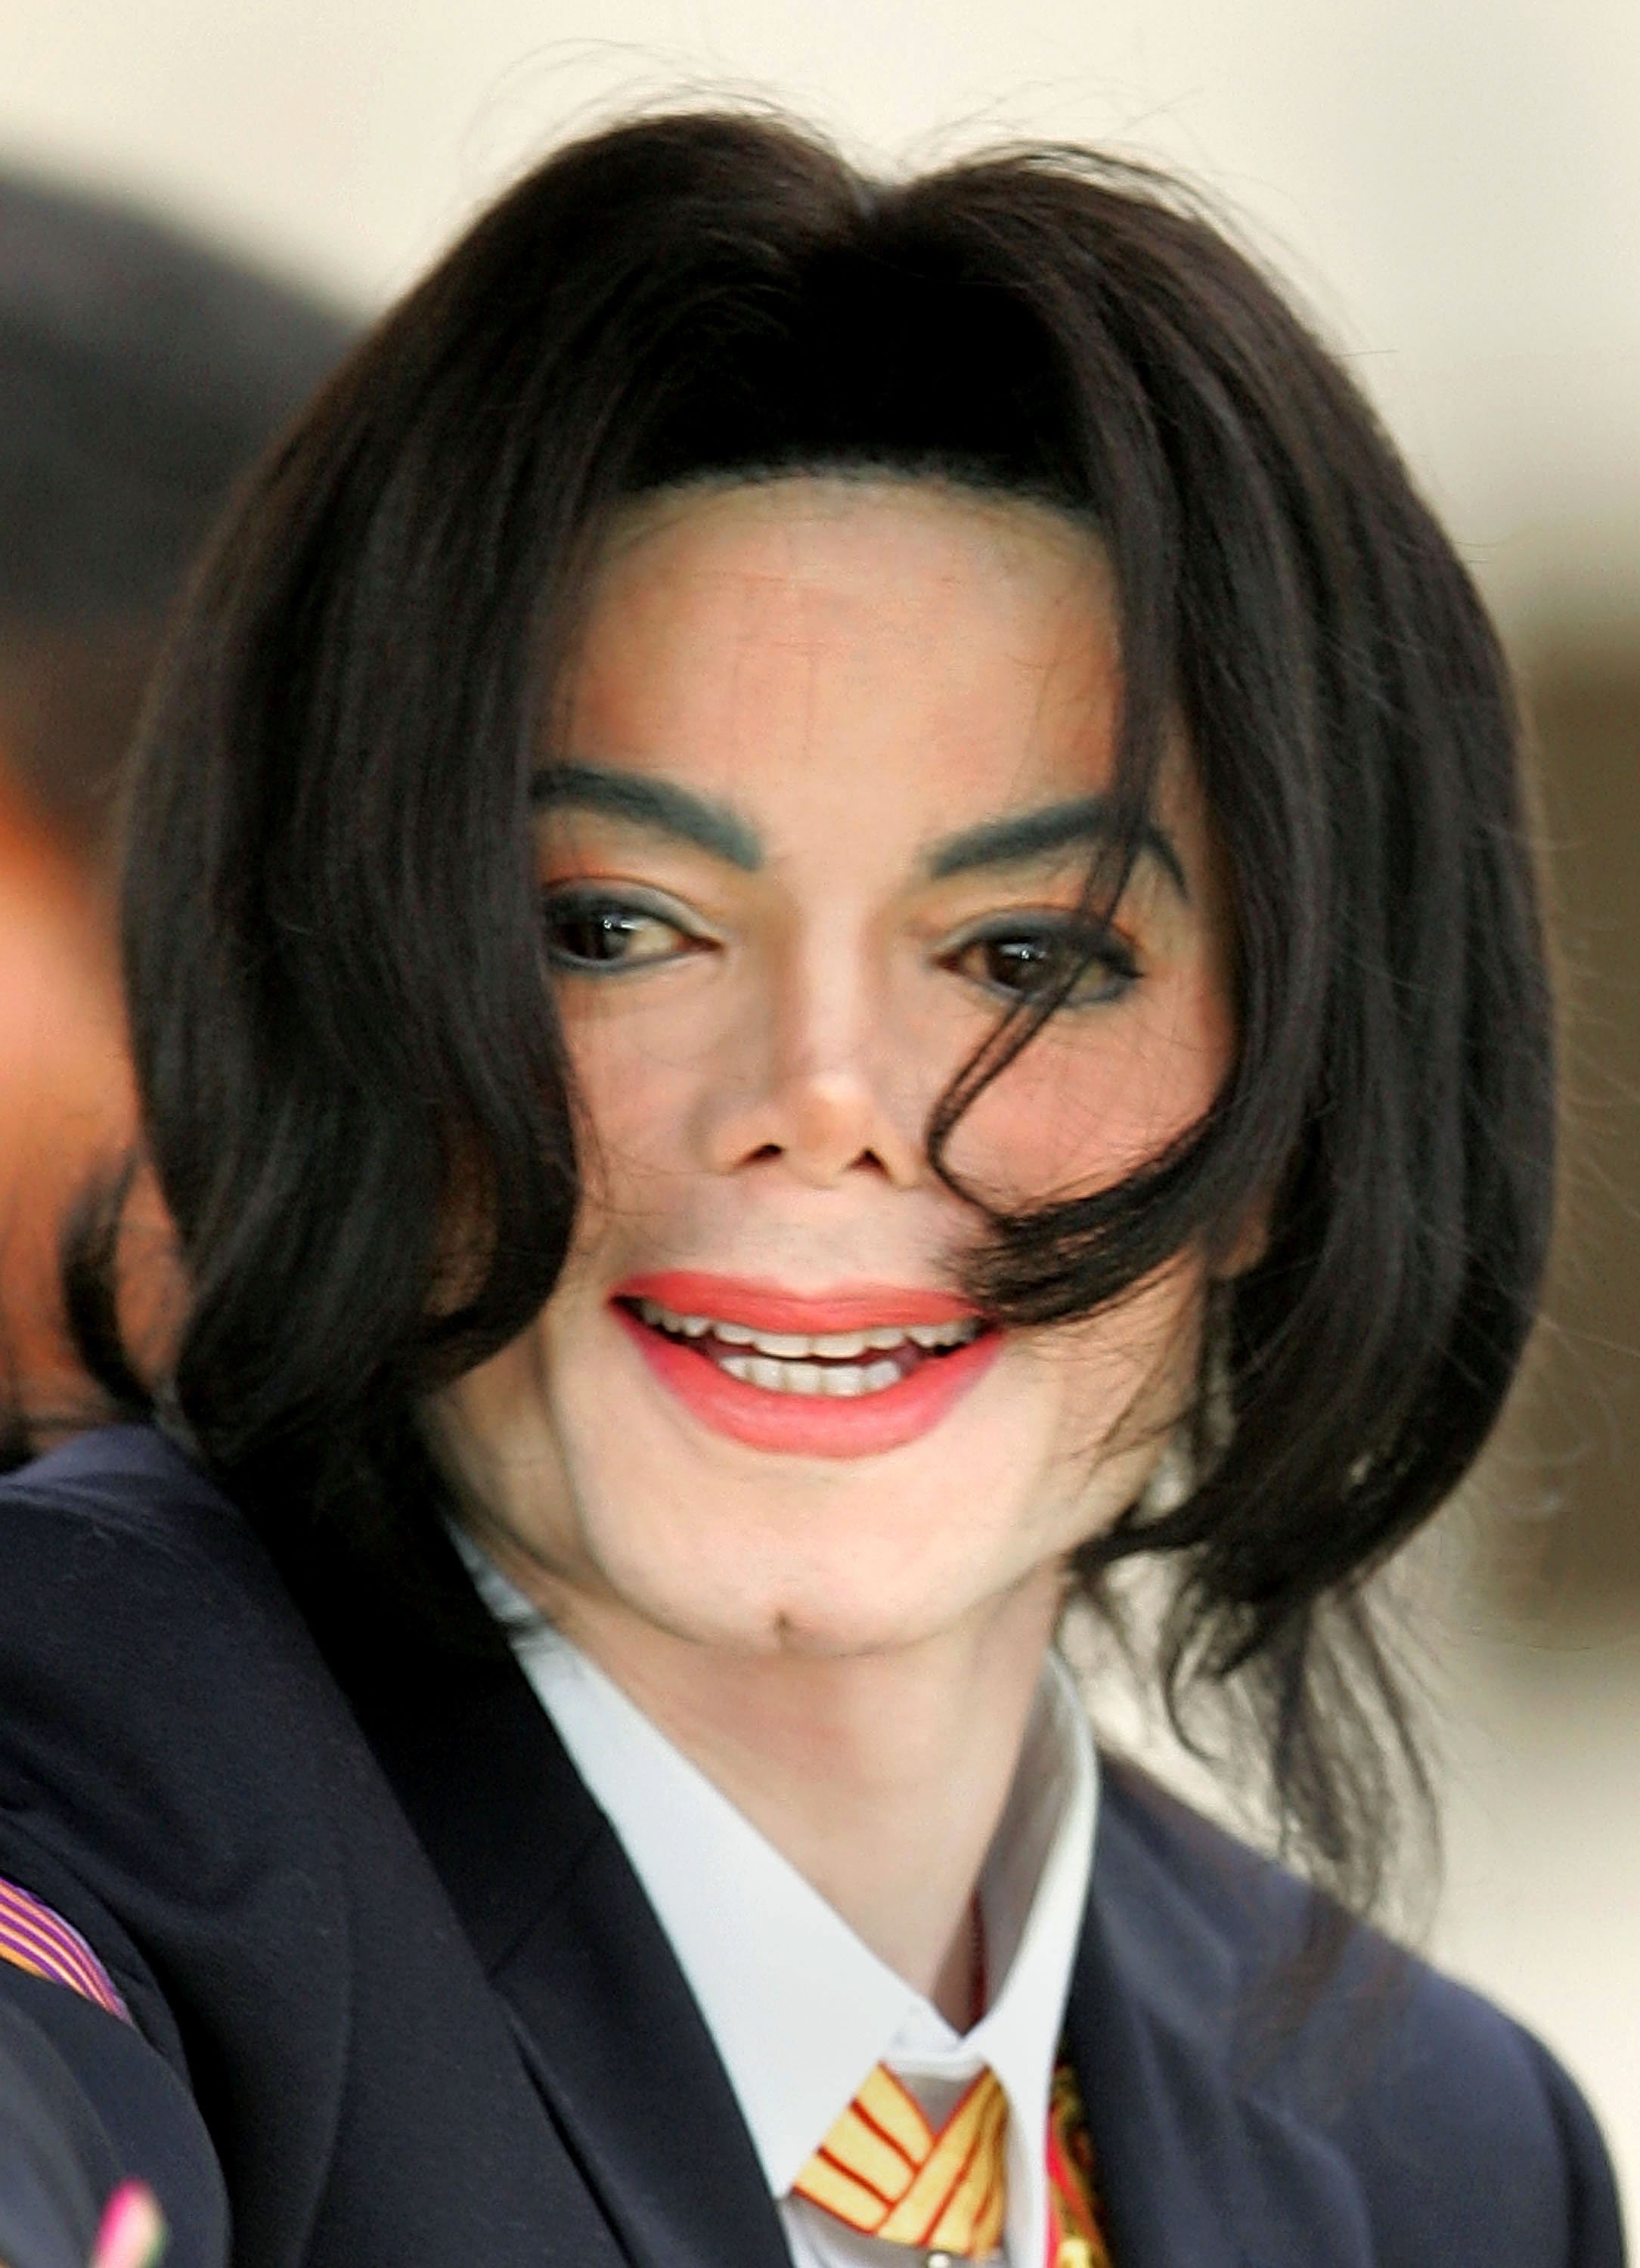 The Late Michael Jackson during his child molestation trial at the Santa Barbara County Courthouse in March 2005. | Photo: Getty Images.  